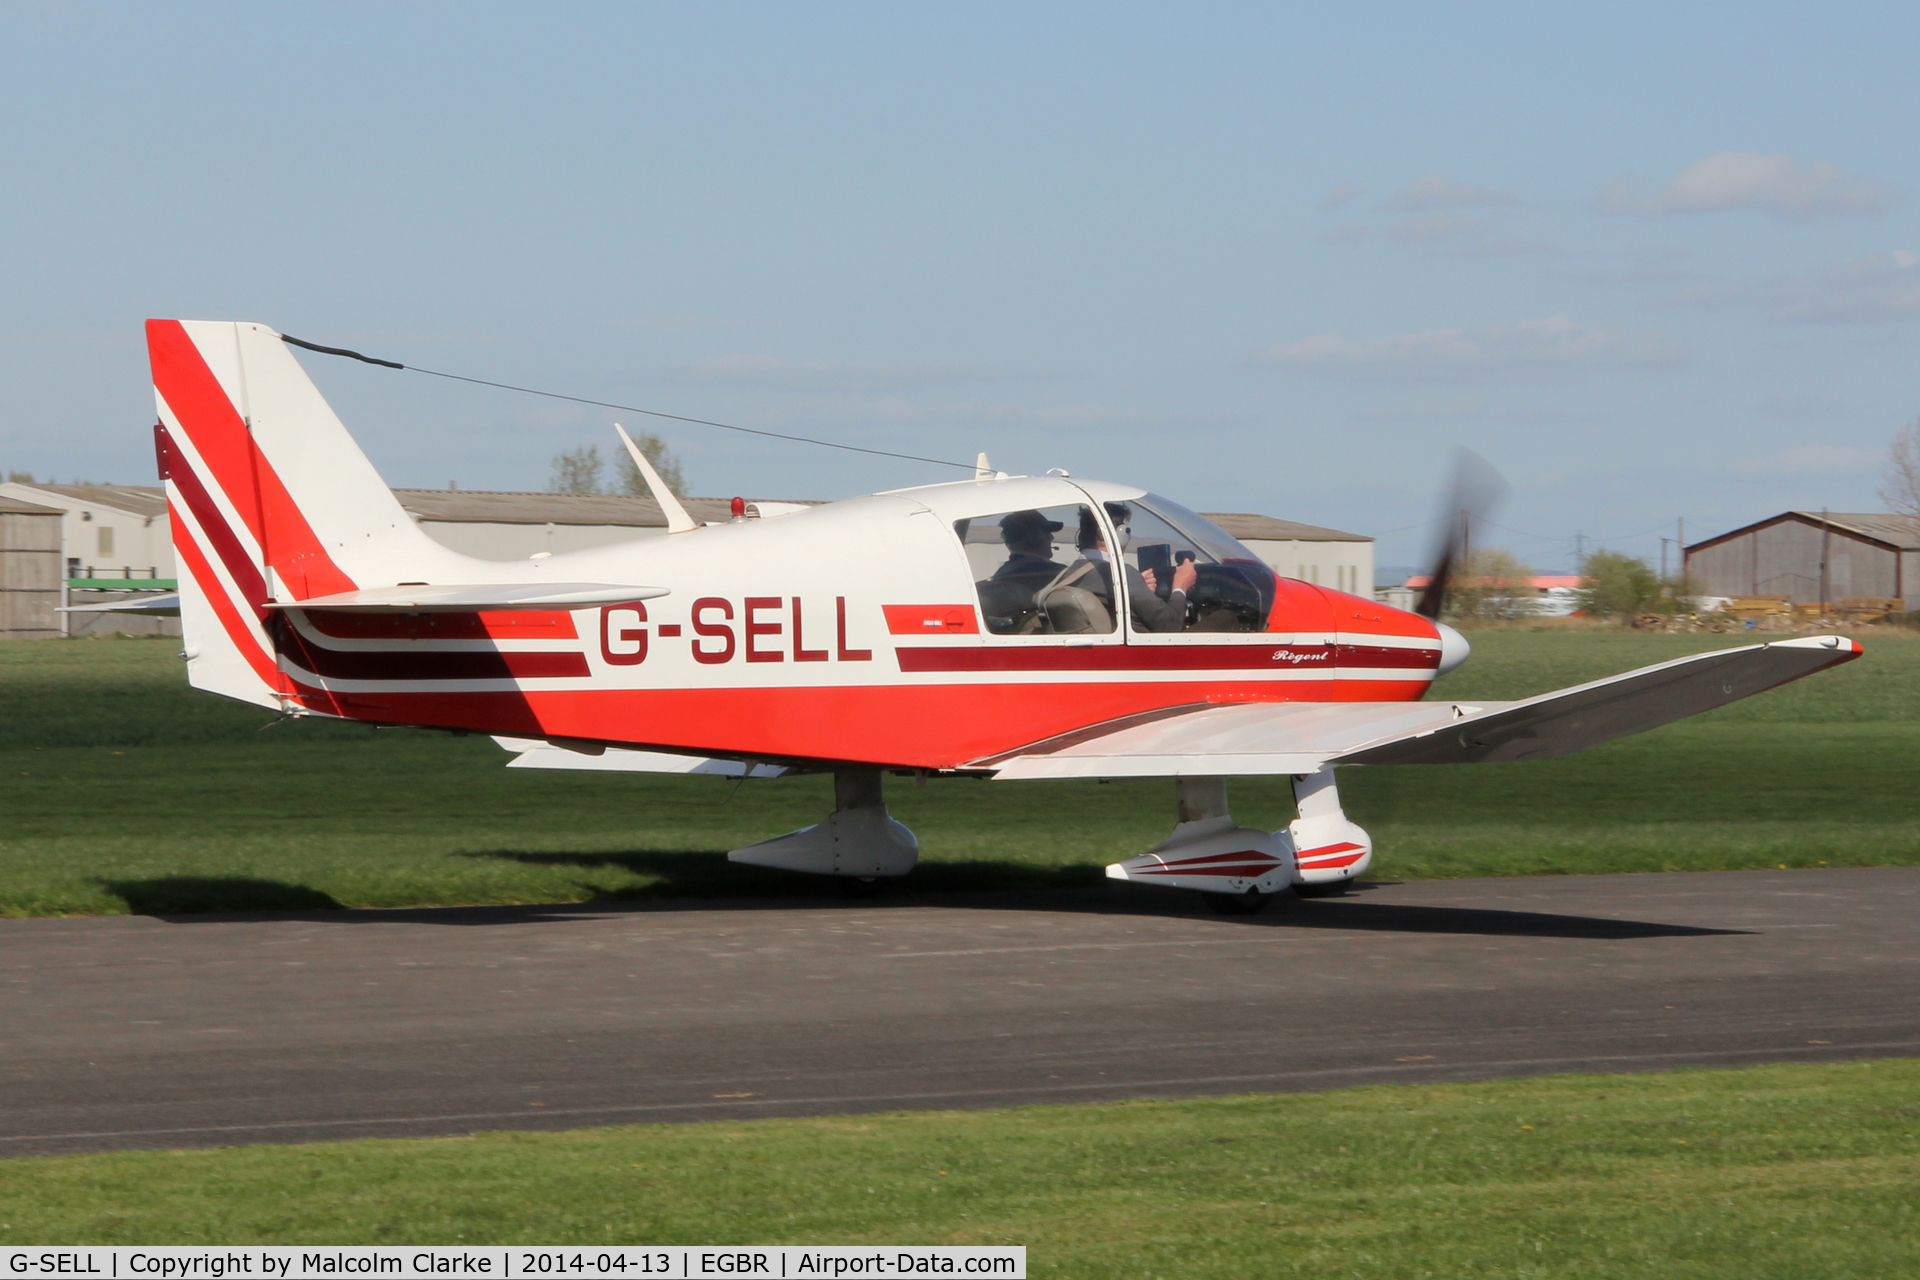 G-SELL, 1976 Robin DR-400-180 Regent Regent C/N 1153, Robin DR-400-180 Regent at Beighton Airfield's Early Bird Fly-In. April 13th 2014.